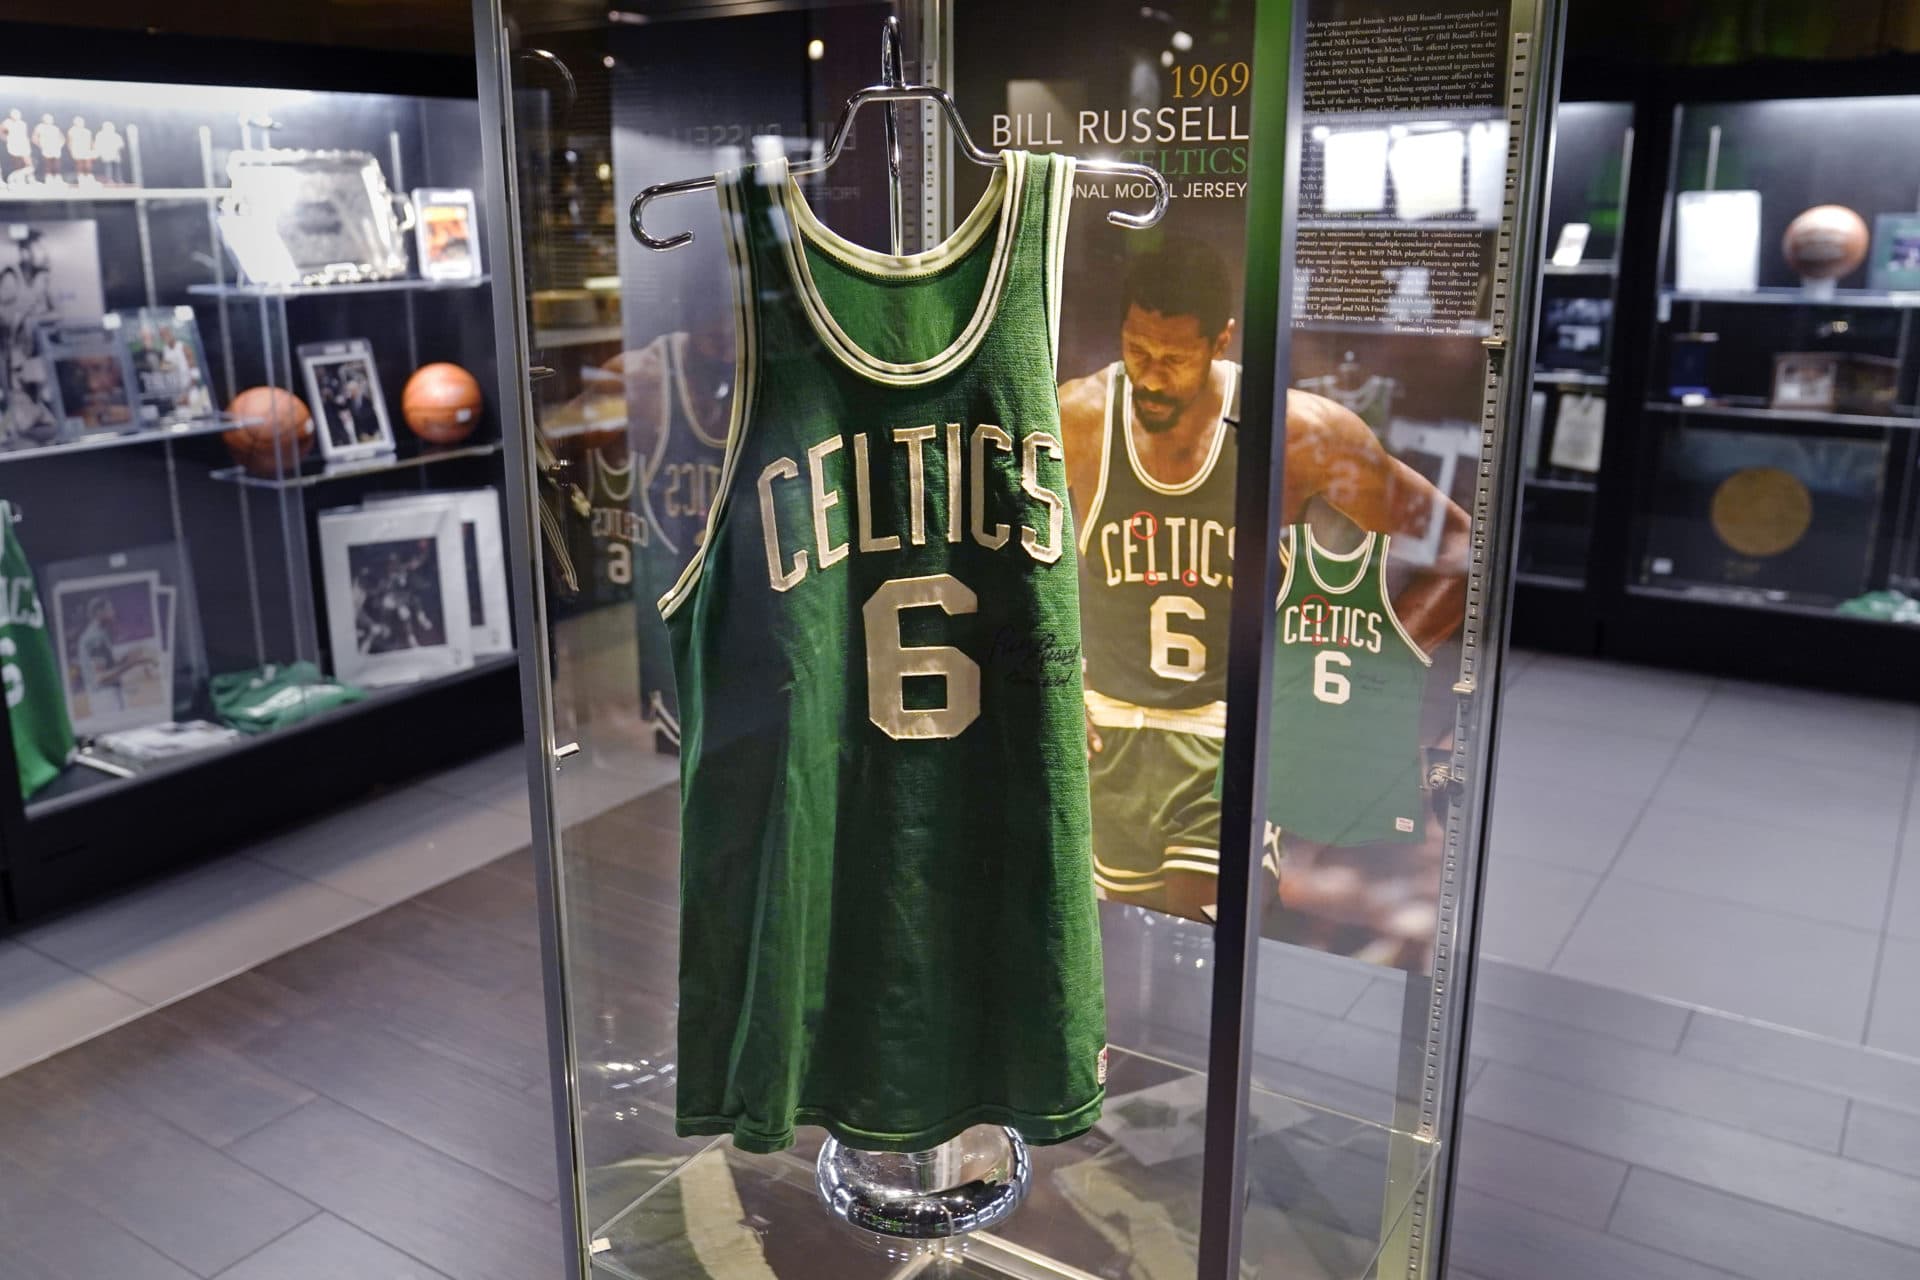 The 1969 game worn jersey of Boston Celtics' legend Bill Russell is displayed along with other memorabilia for auction in 2021 in Boston. (Charles Krupa/AP)